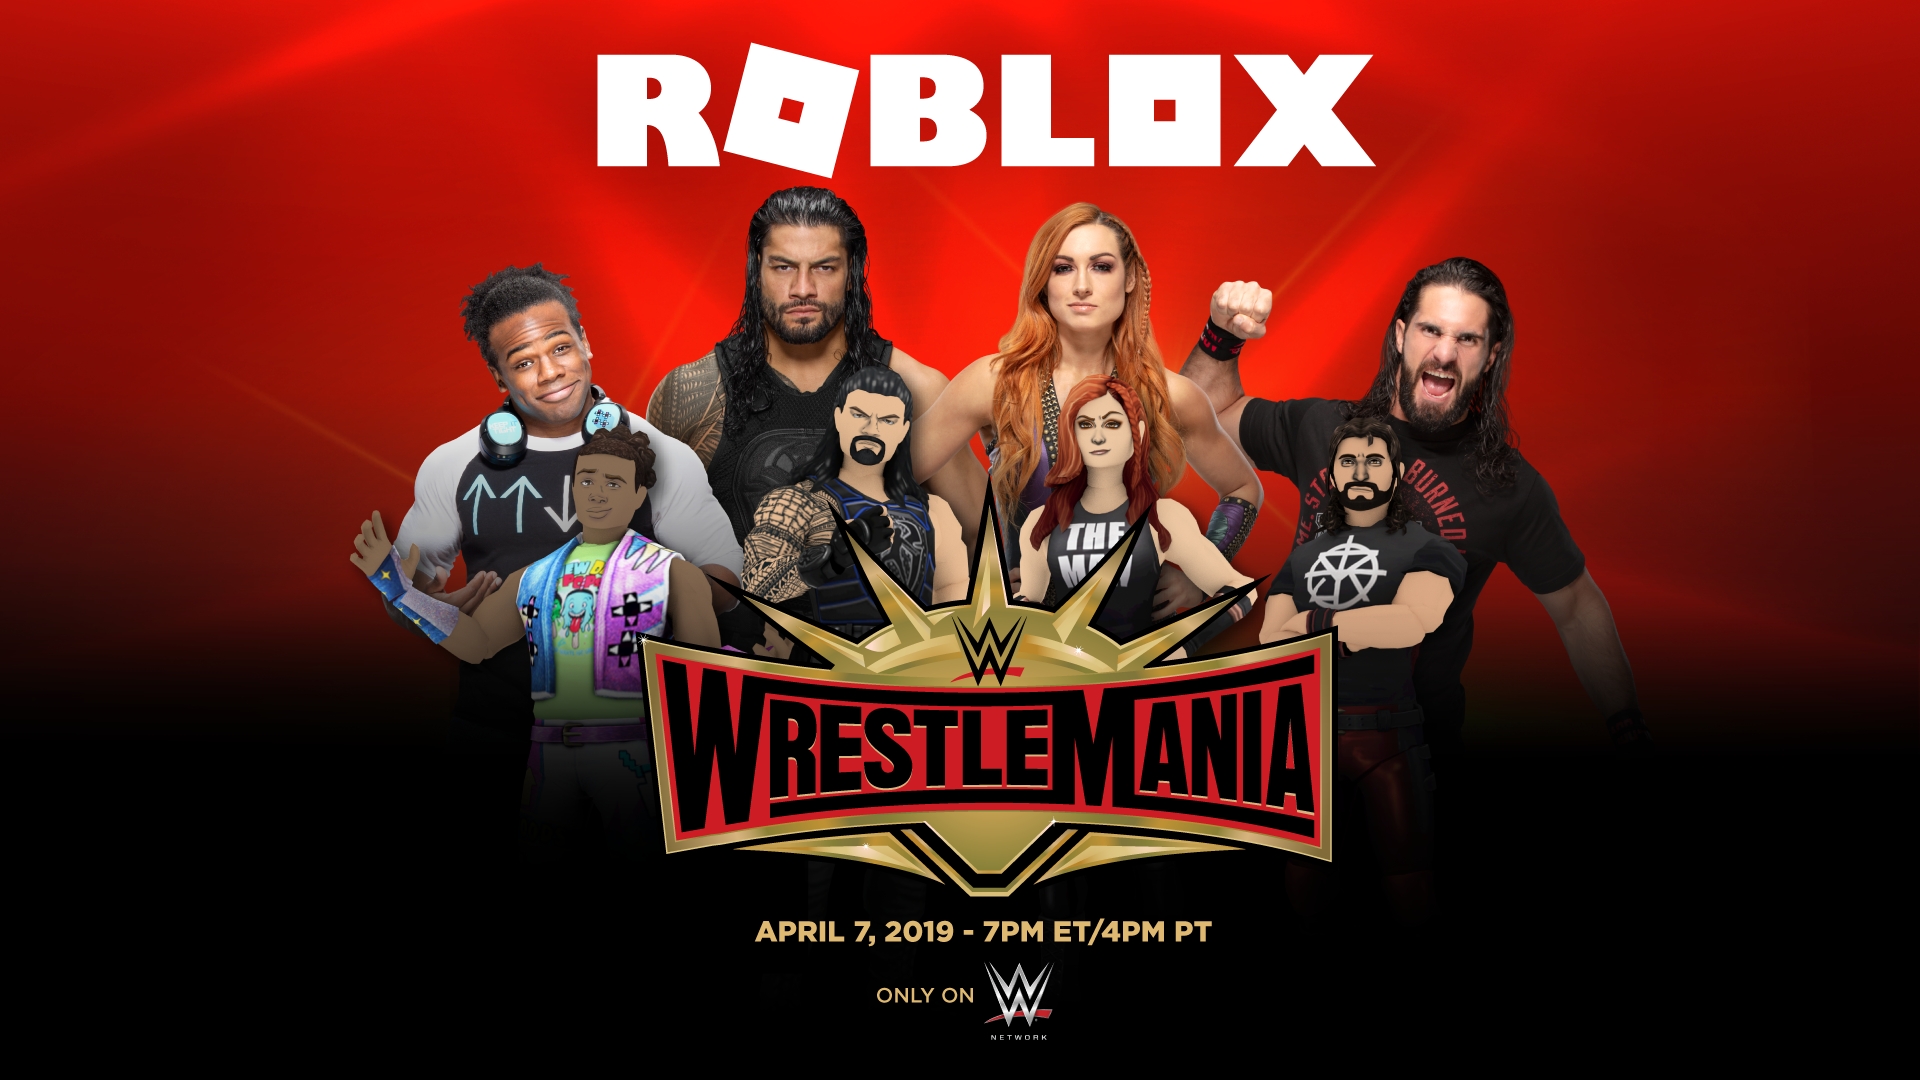 Roblox And Wwe Partner To Celebrate Wrestlemania Business Wire - roblox contact information